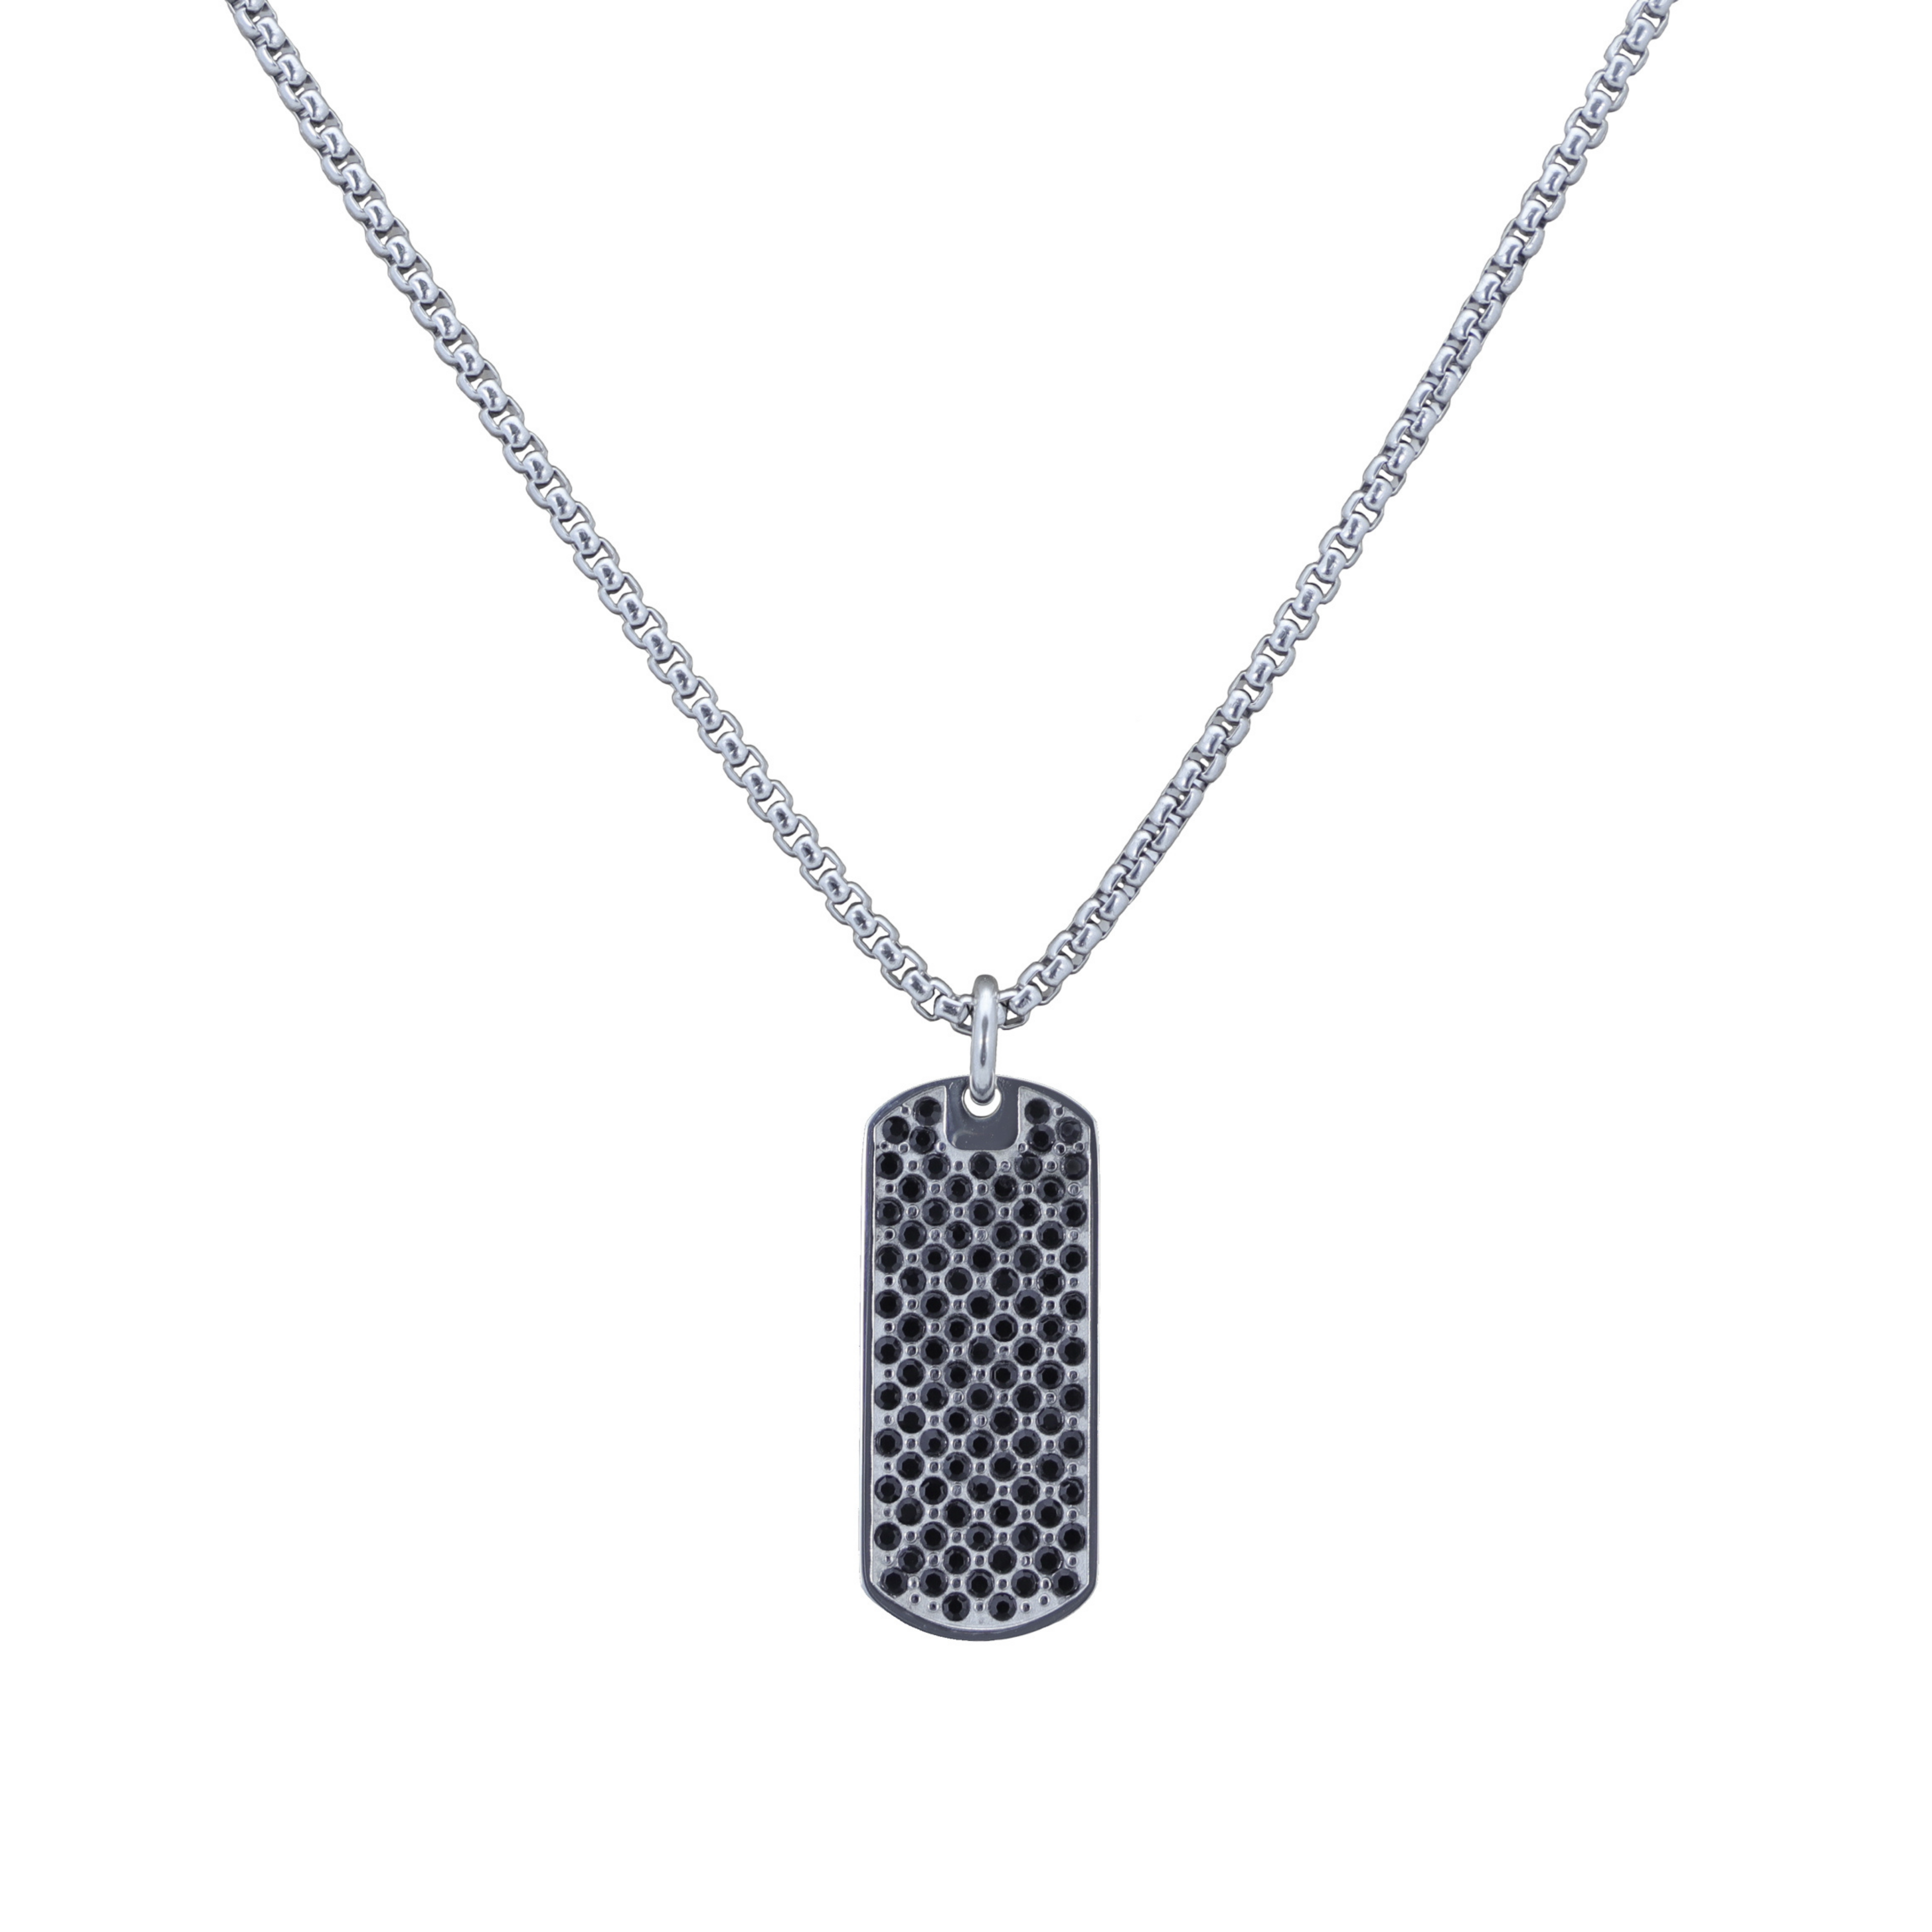 Dog Tag Necklace (6883431153830)